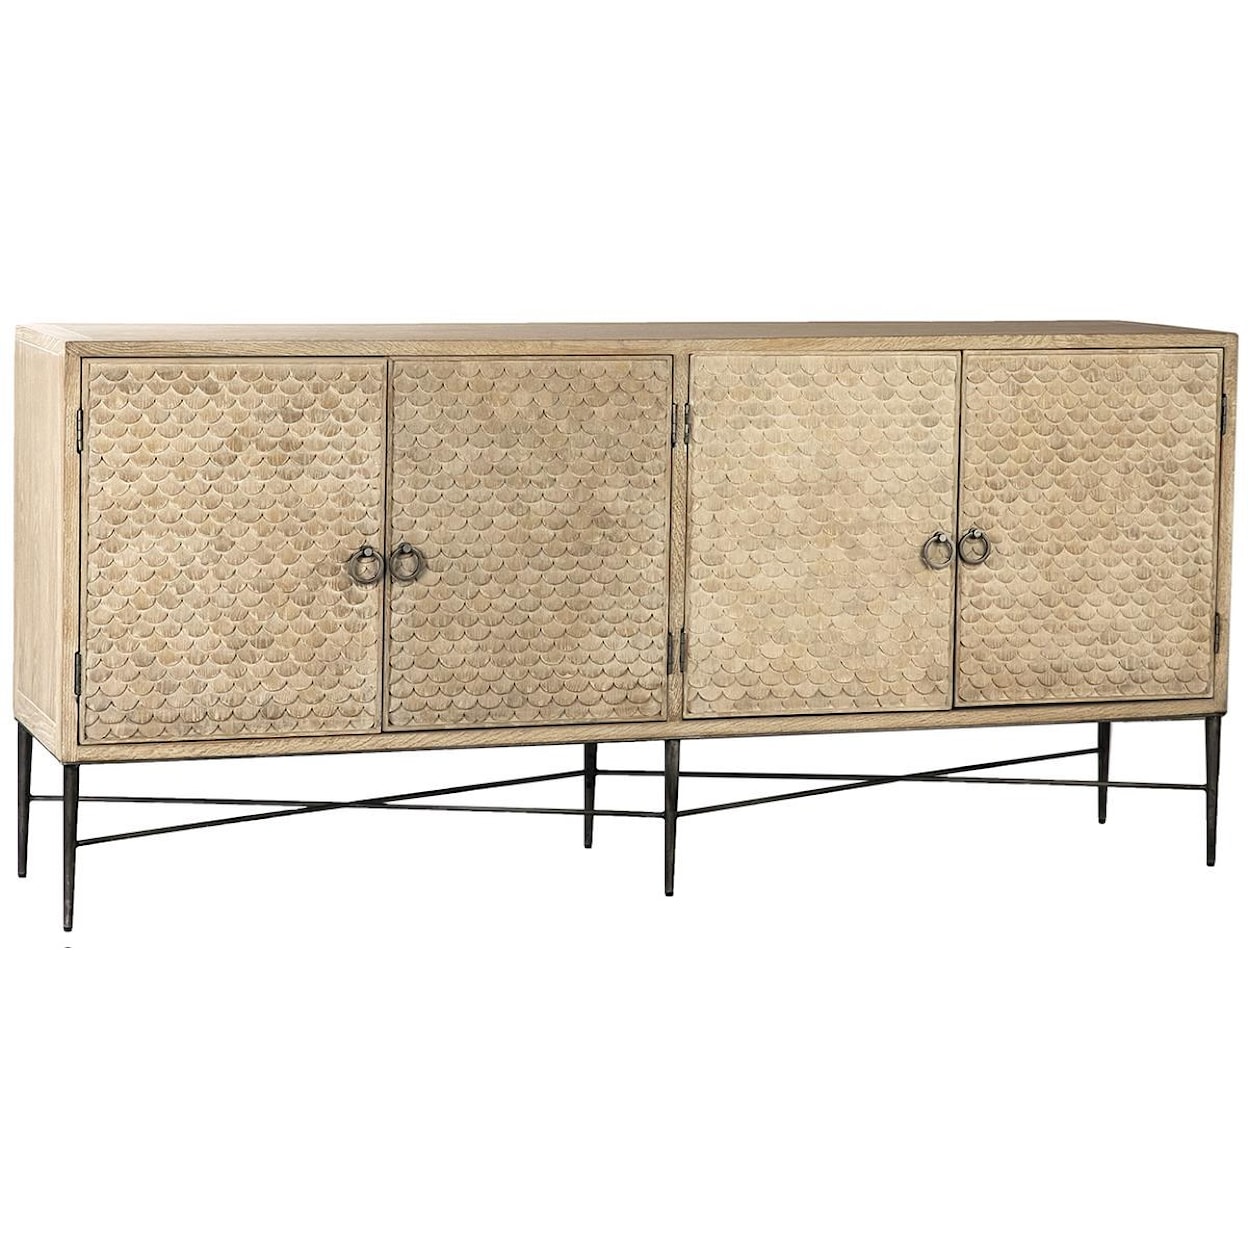 Dovetail Furniture Sideboards/Buffets Dorian Sideboard